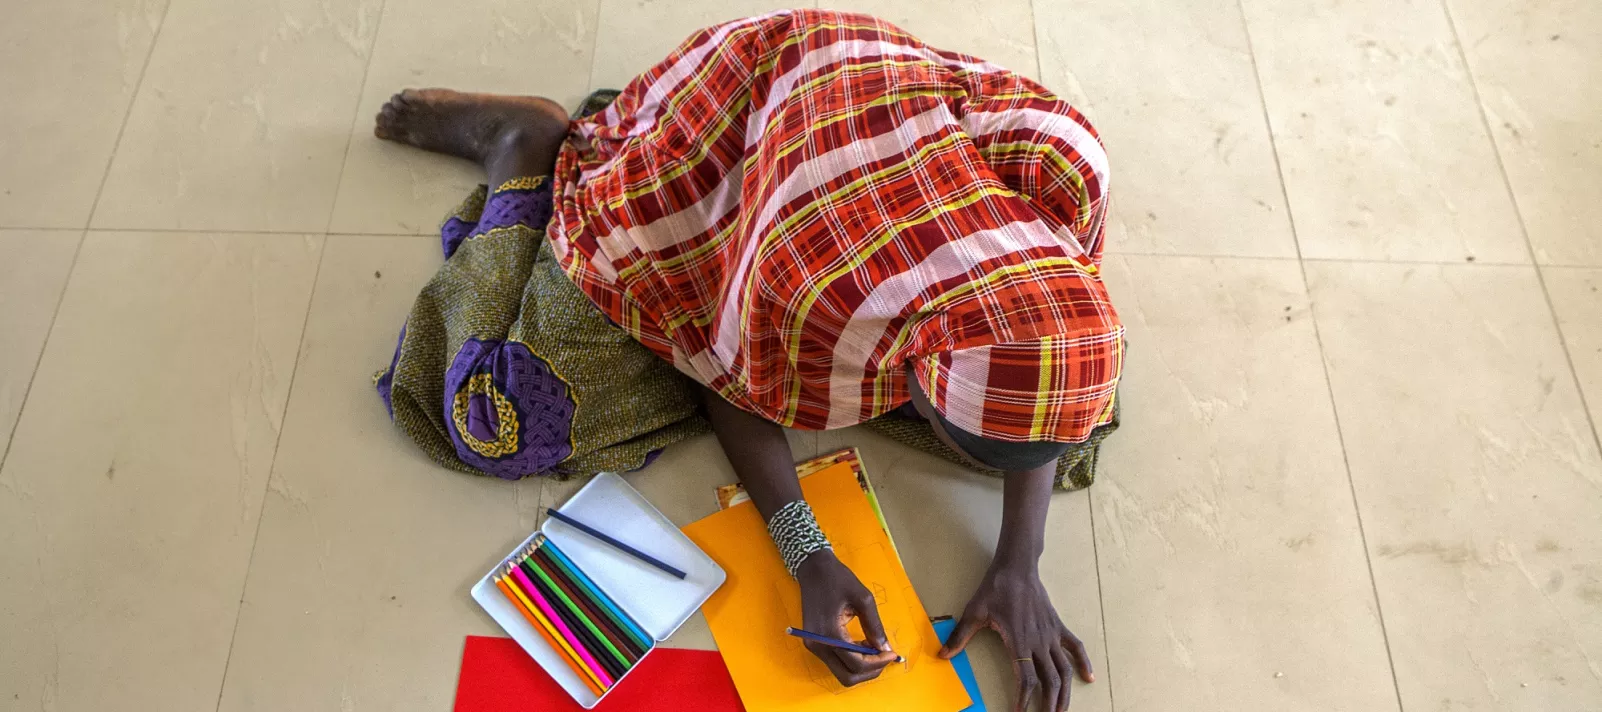 A girl drawing on coloured paper in an IDP camp in northeast Nigeria.